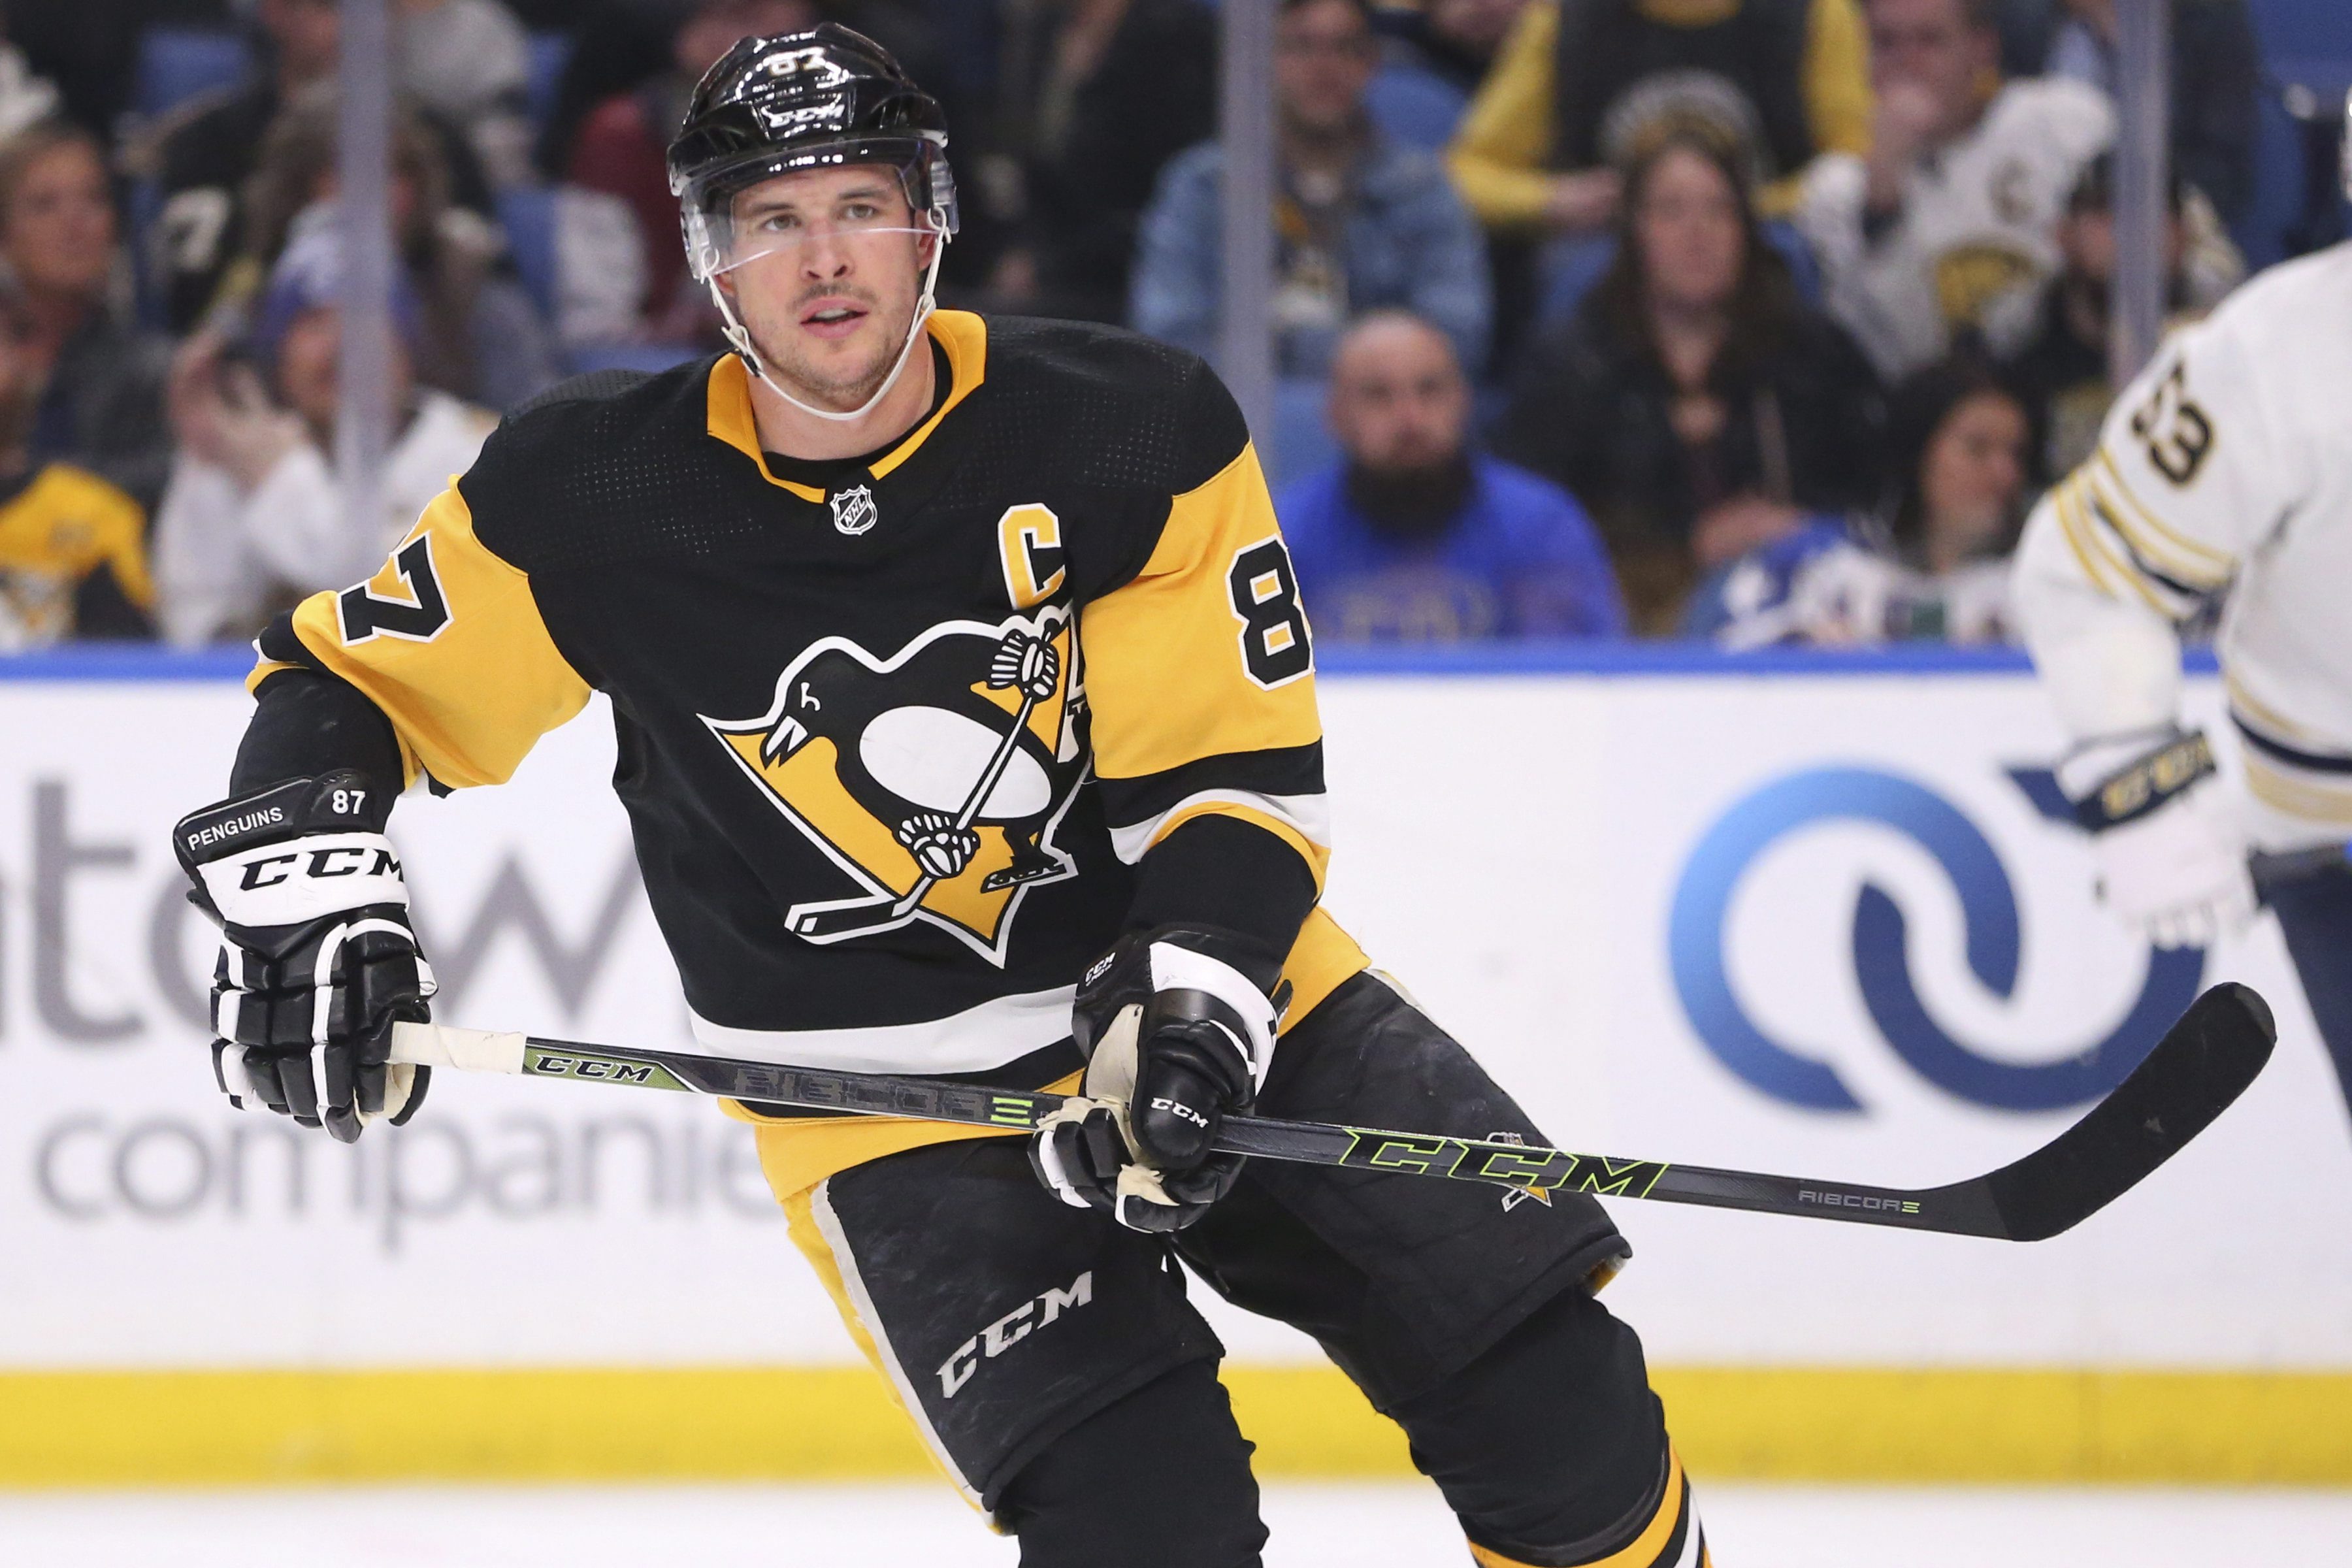 Sydney Crosby returning to N.S. for NHL game